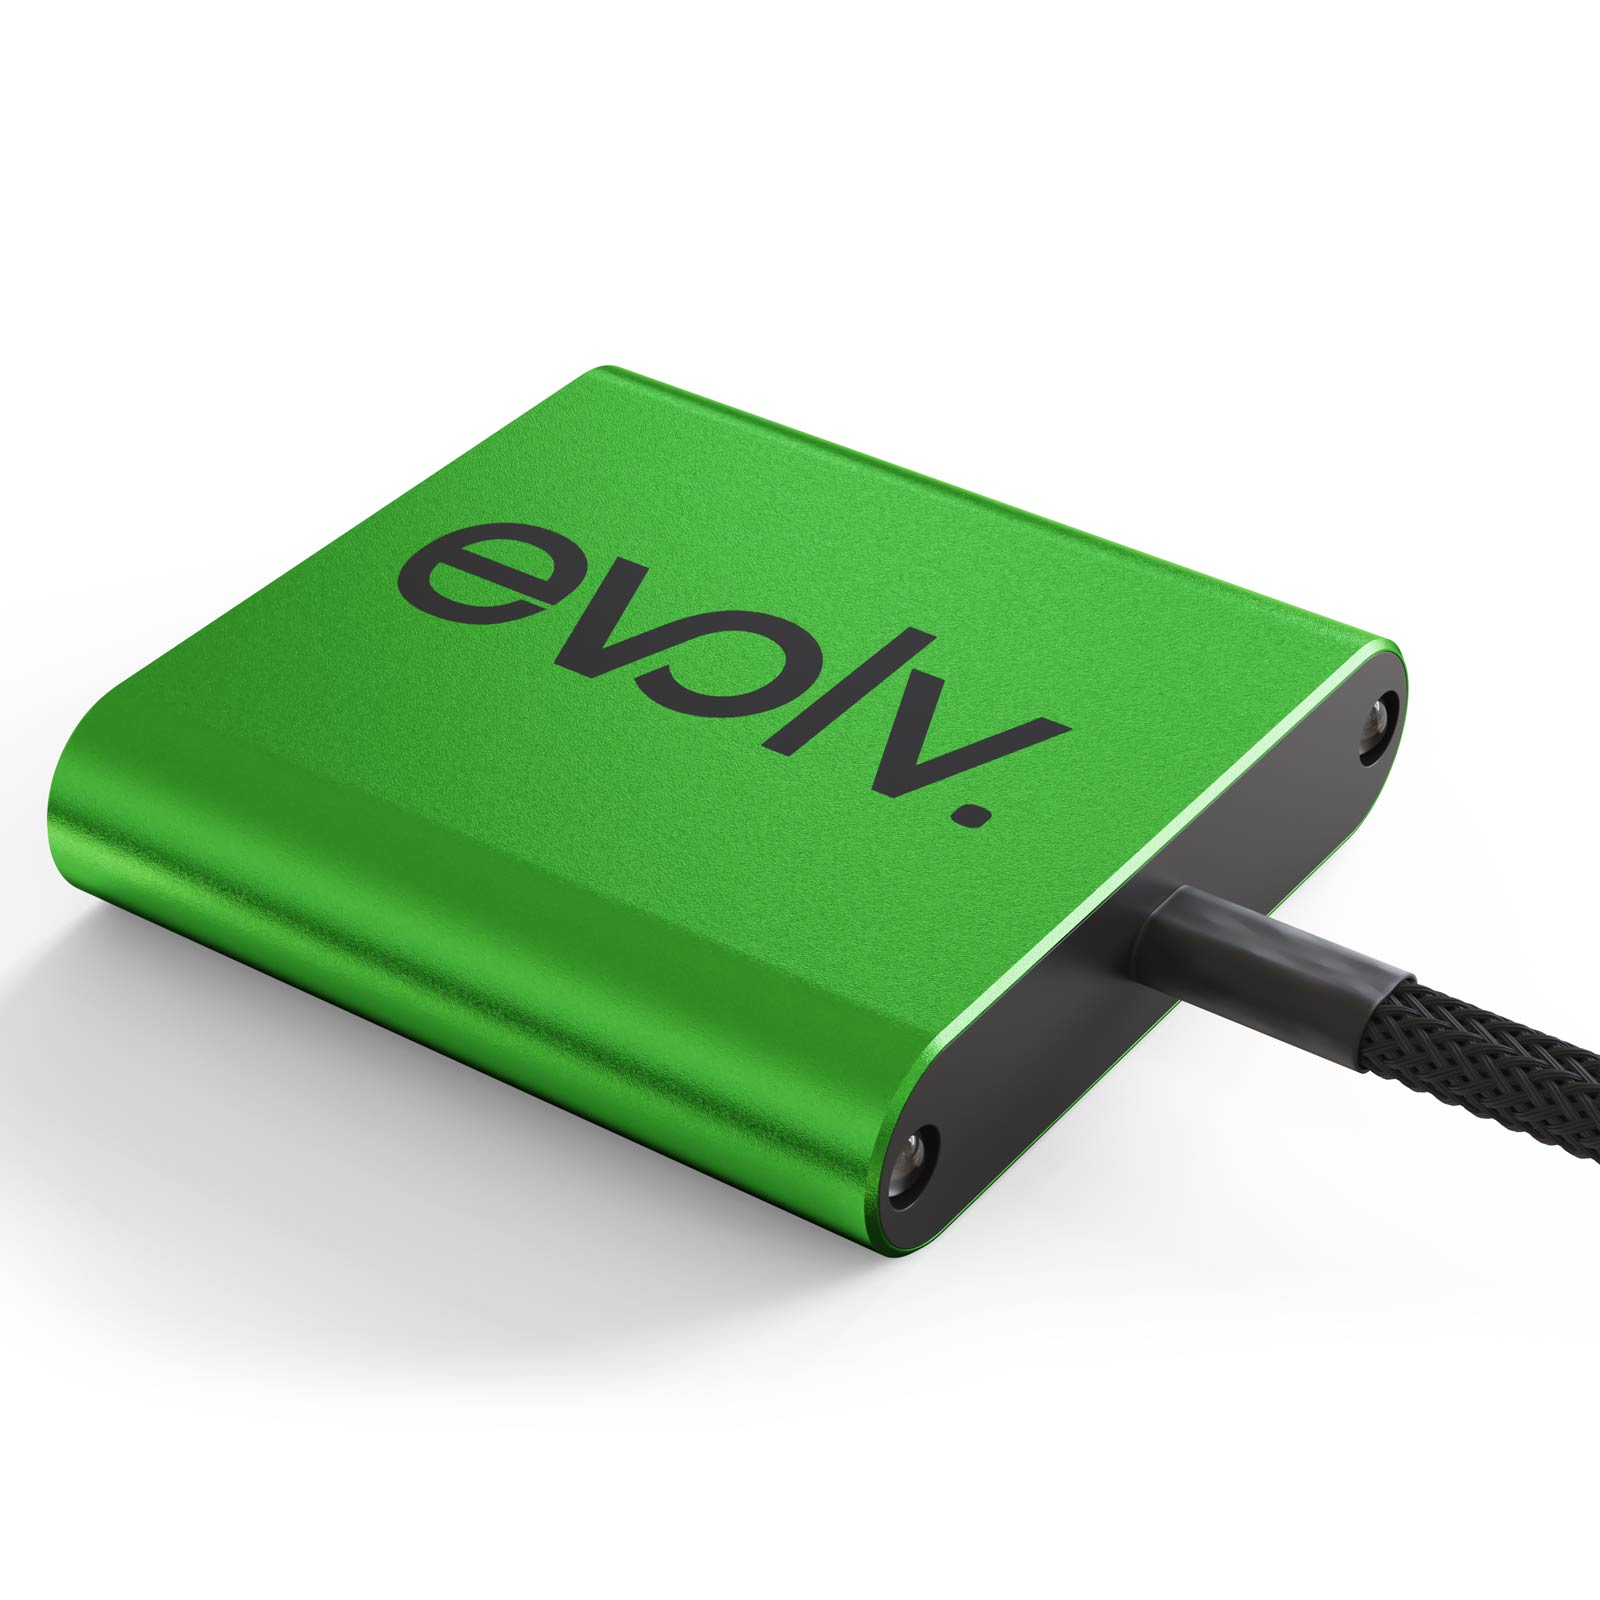 Increase your fuel mileage, performance and throttle response with an Evolv Kia Rondo Performance Chip!